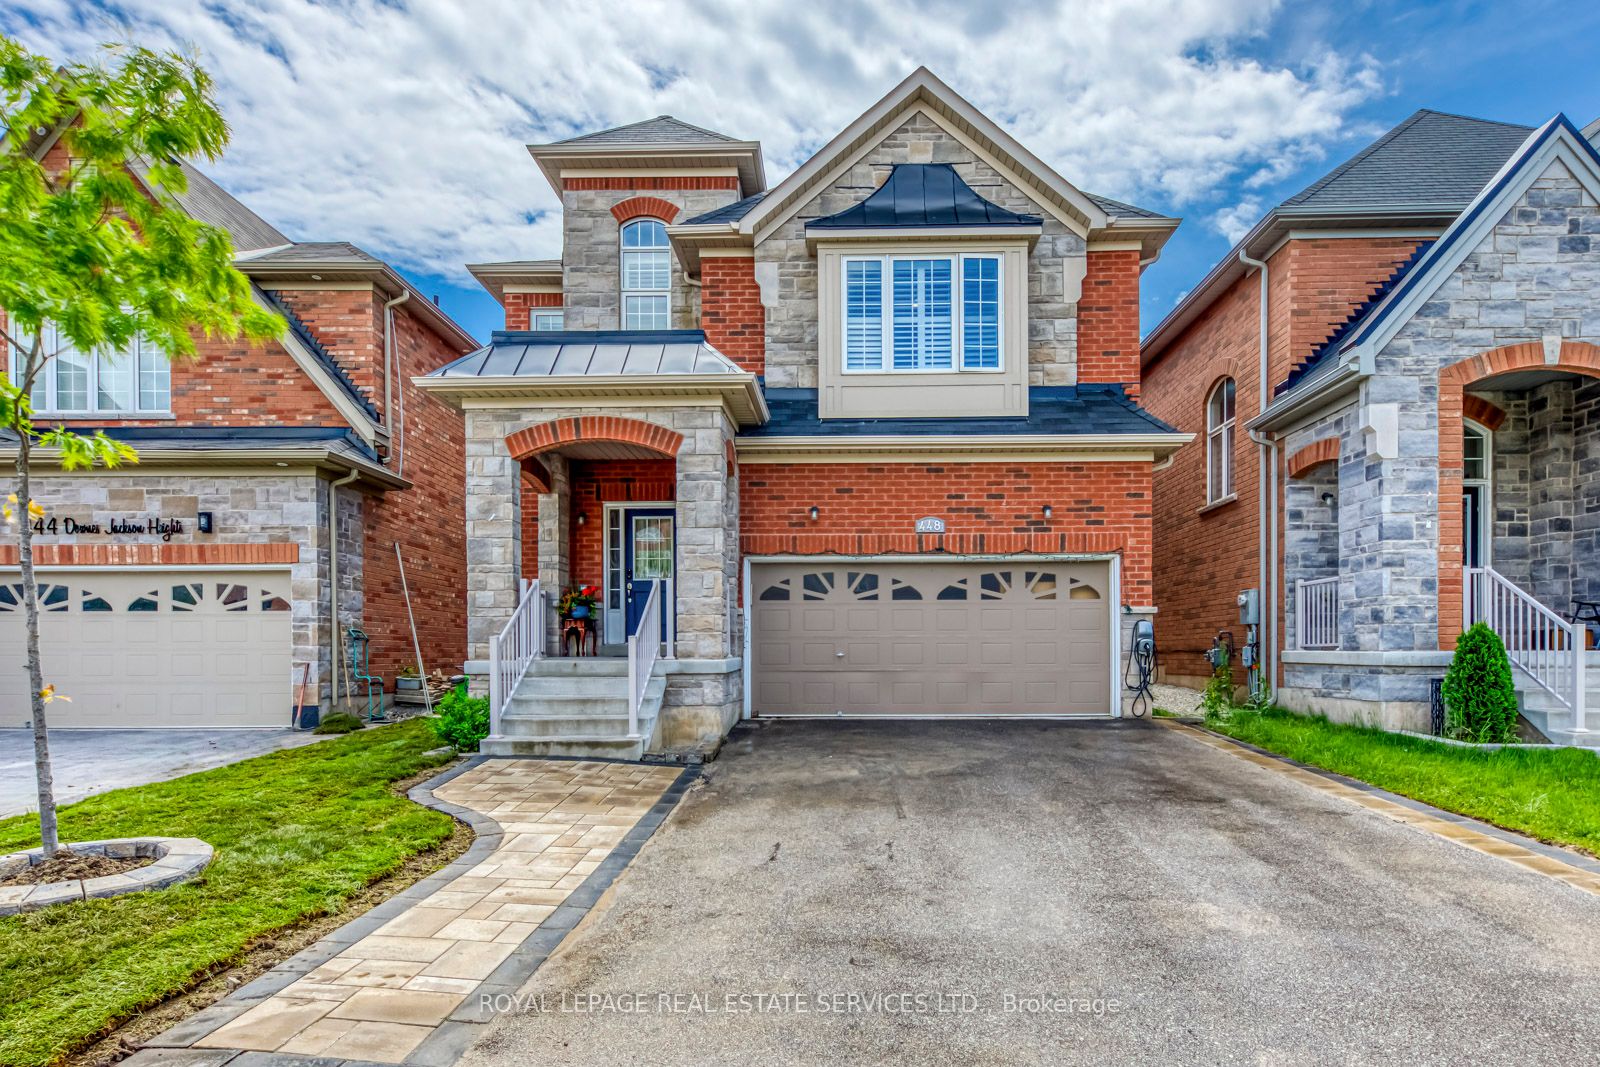 Detached house for sale at 448 Downes Jackson Hts Milton Ontario